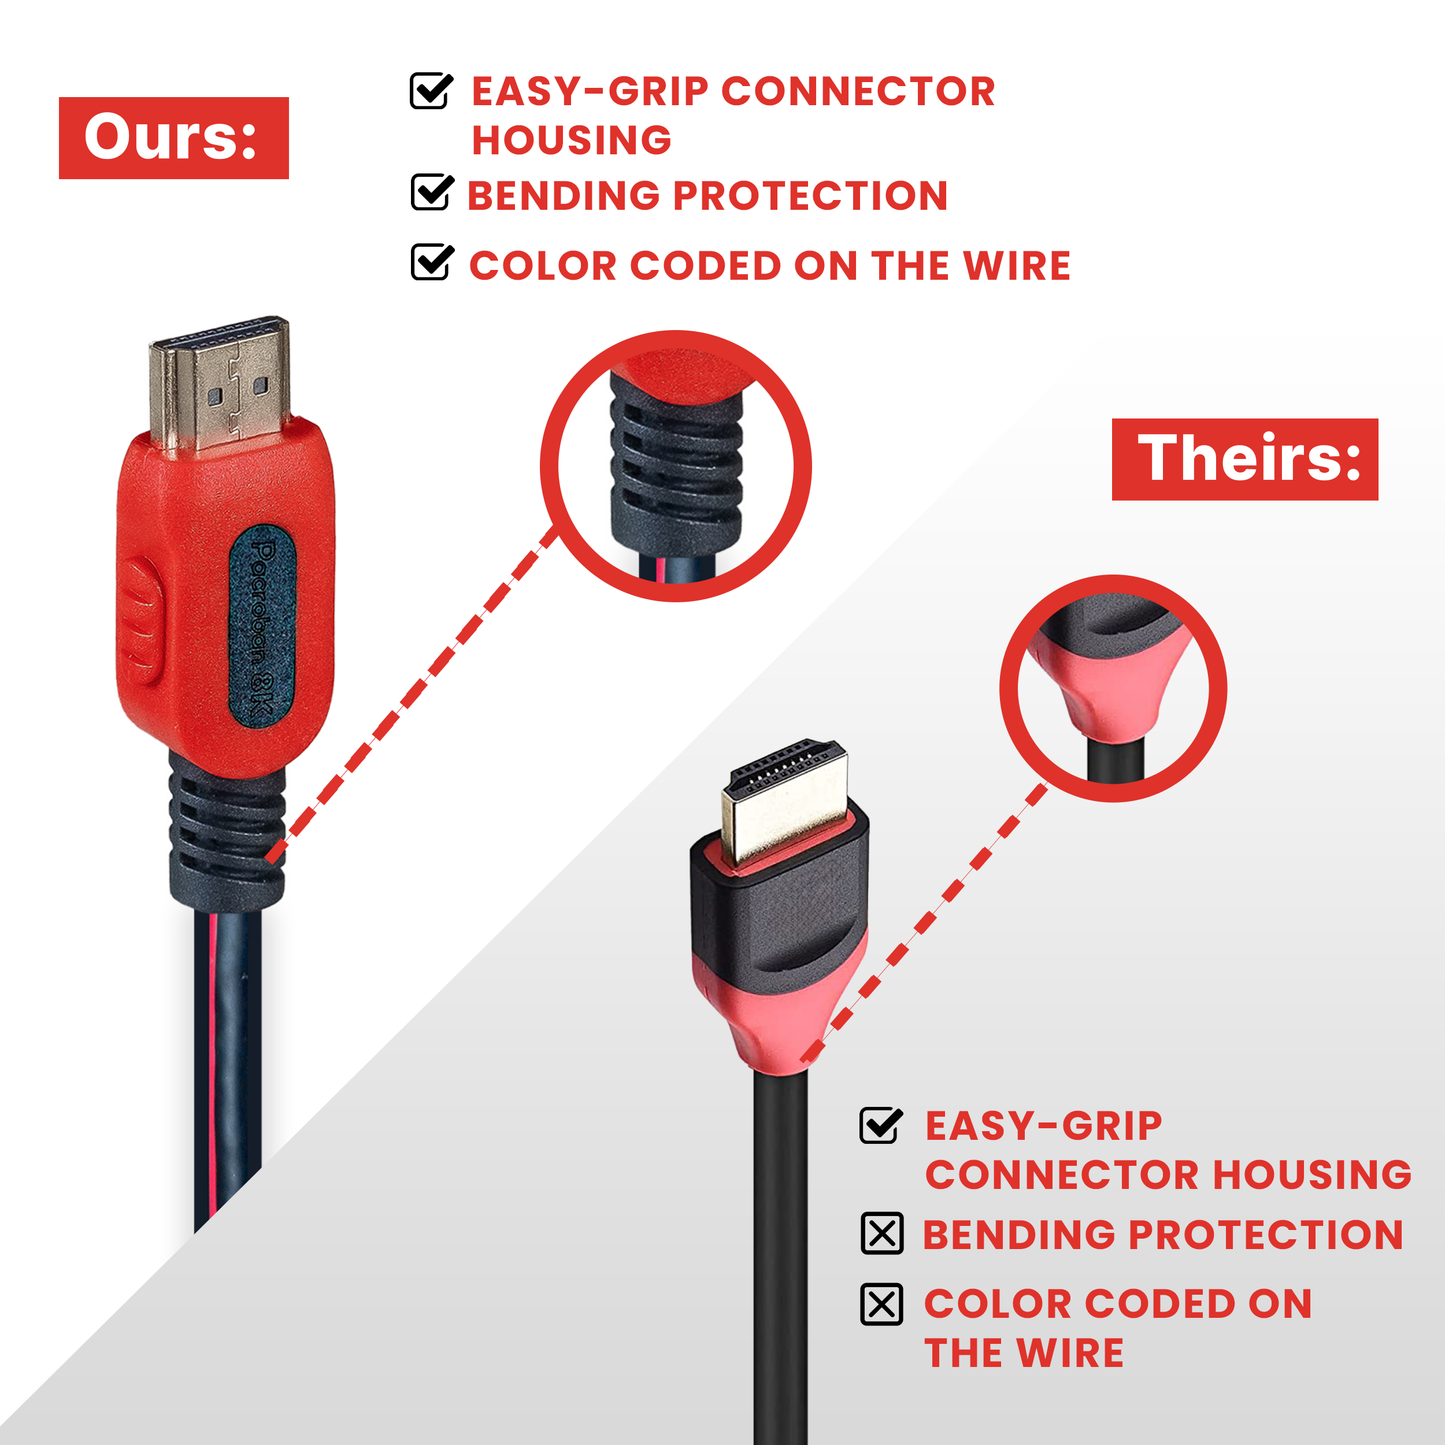 Bulk case of HDMI Cables Professional AV Quality Wholesale - HDMI 2.1 Cable supports 8K, 4K 120hz